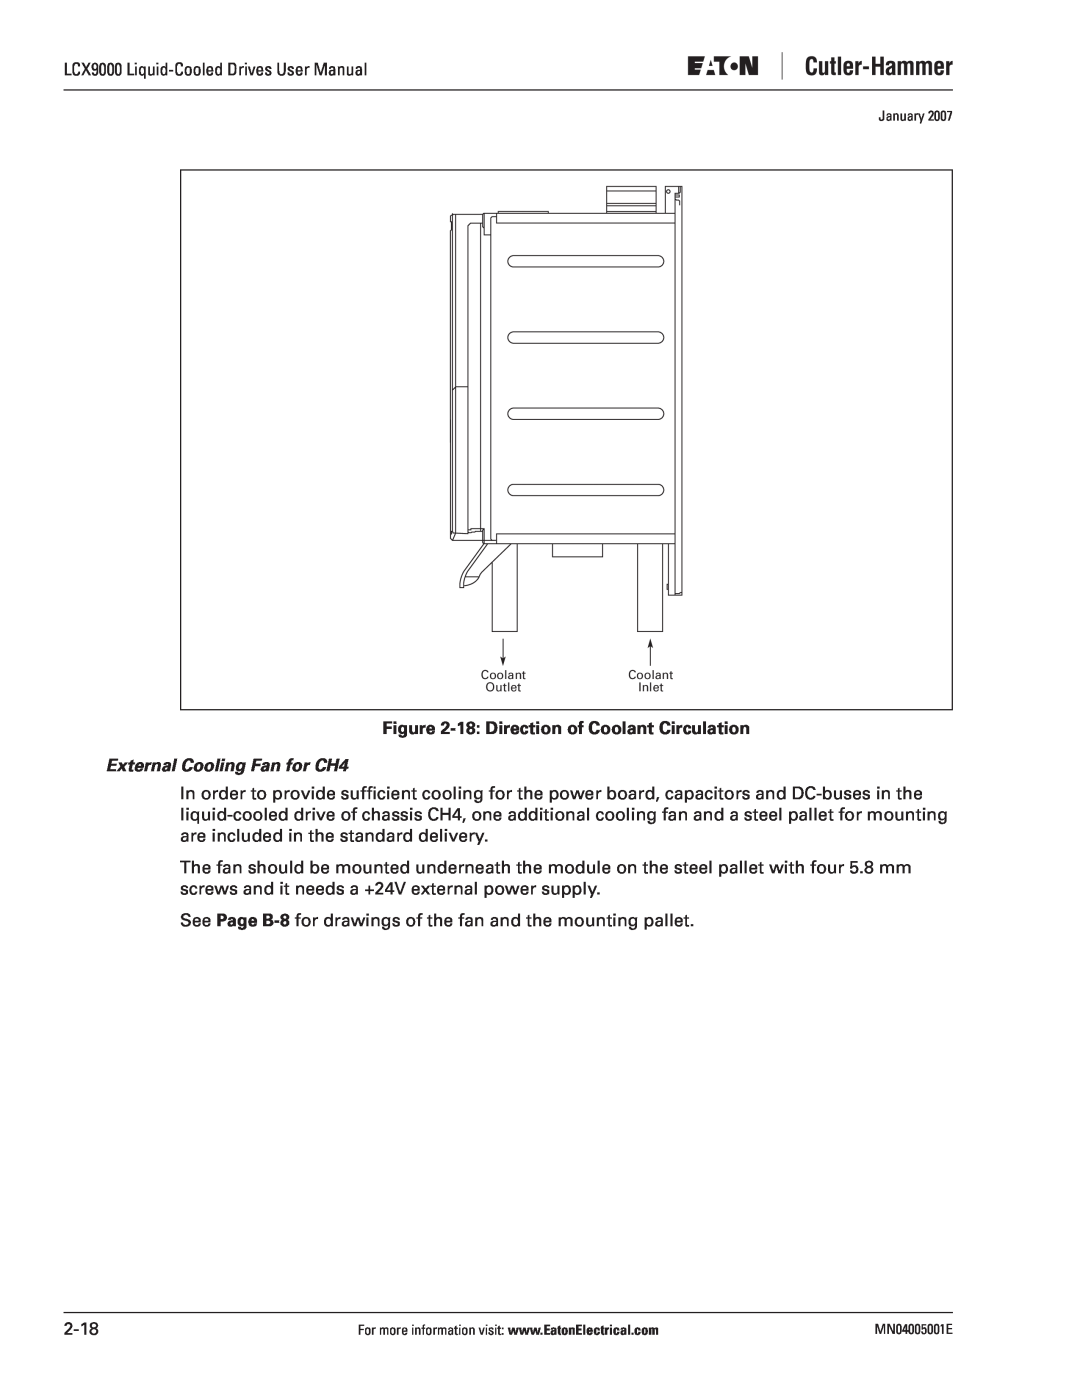 J. T. Eaton LCX9000 user manual 18 Direction of Coolant Circulation, External Cooling Fan for CH4 